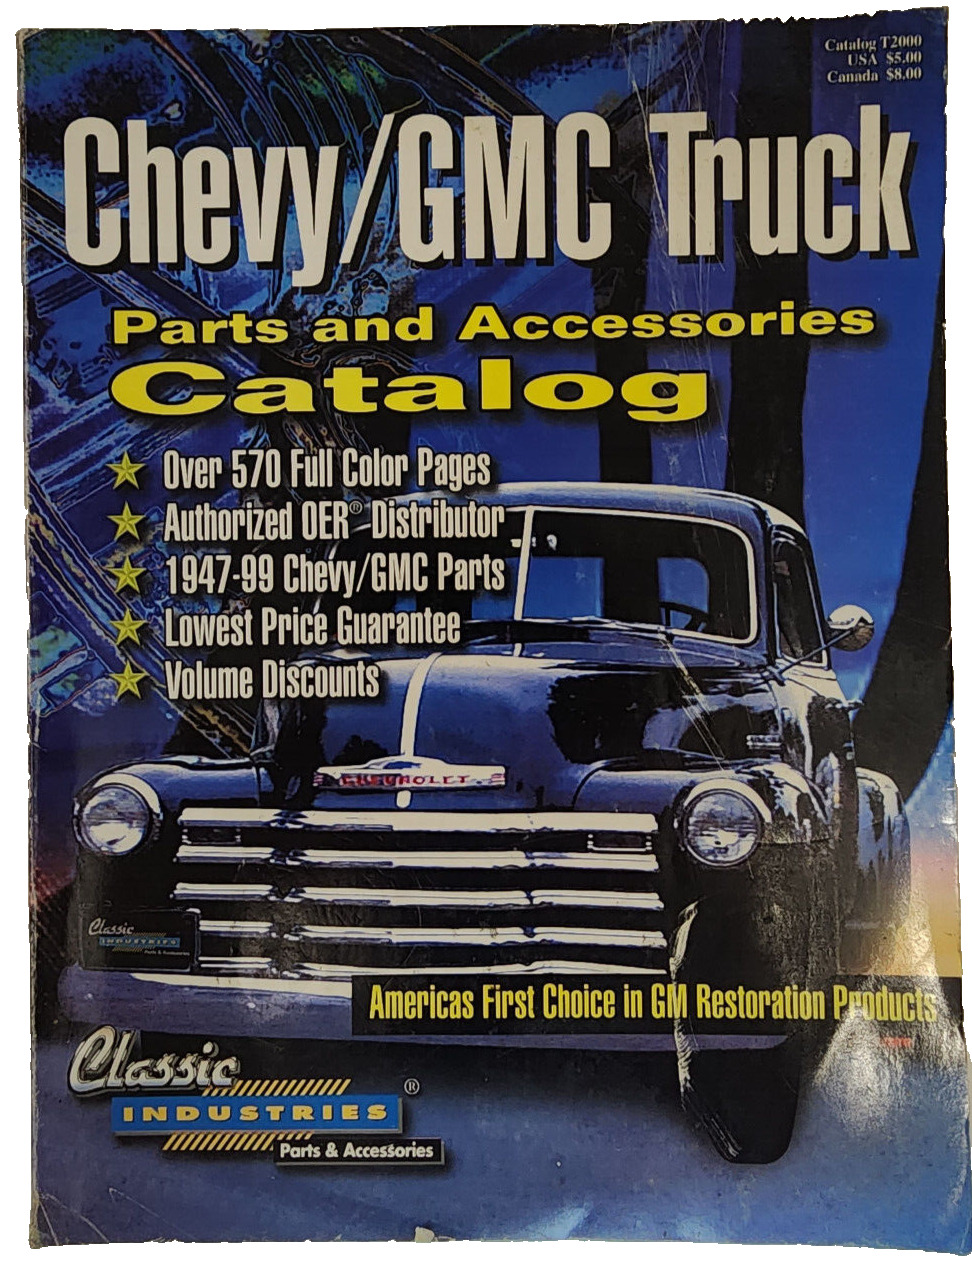 Chevy/GMC Parts And. Accessories Catalog T2000